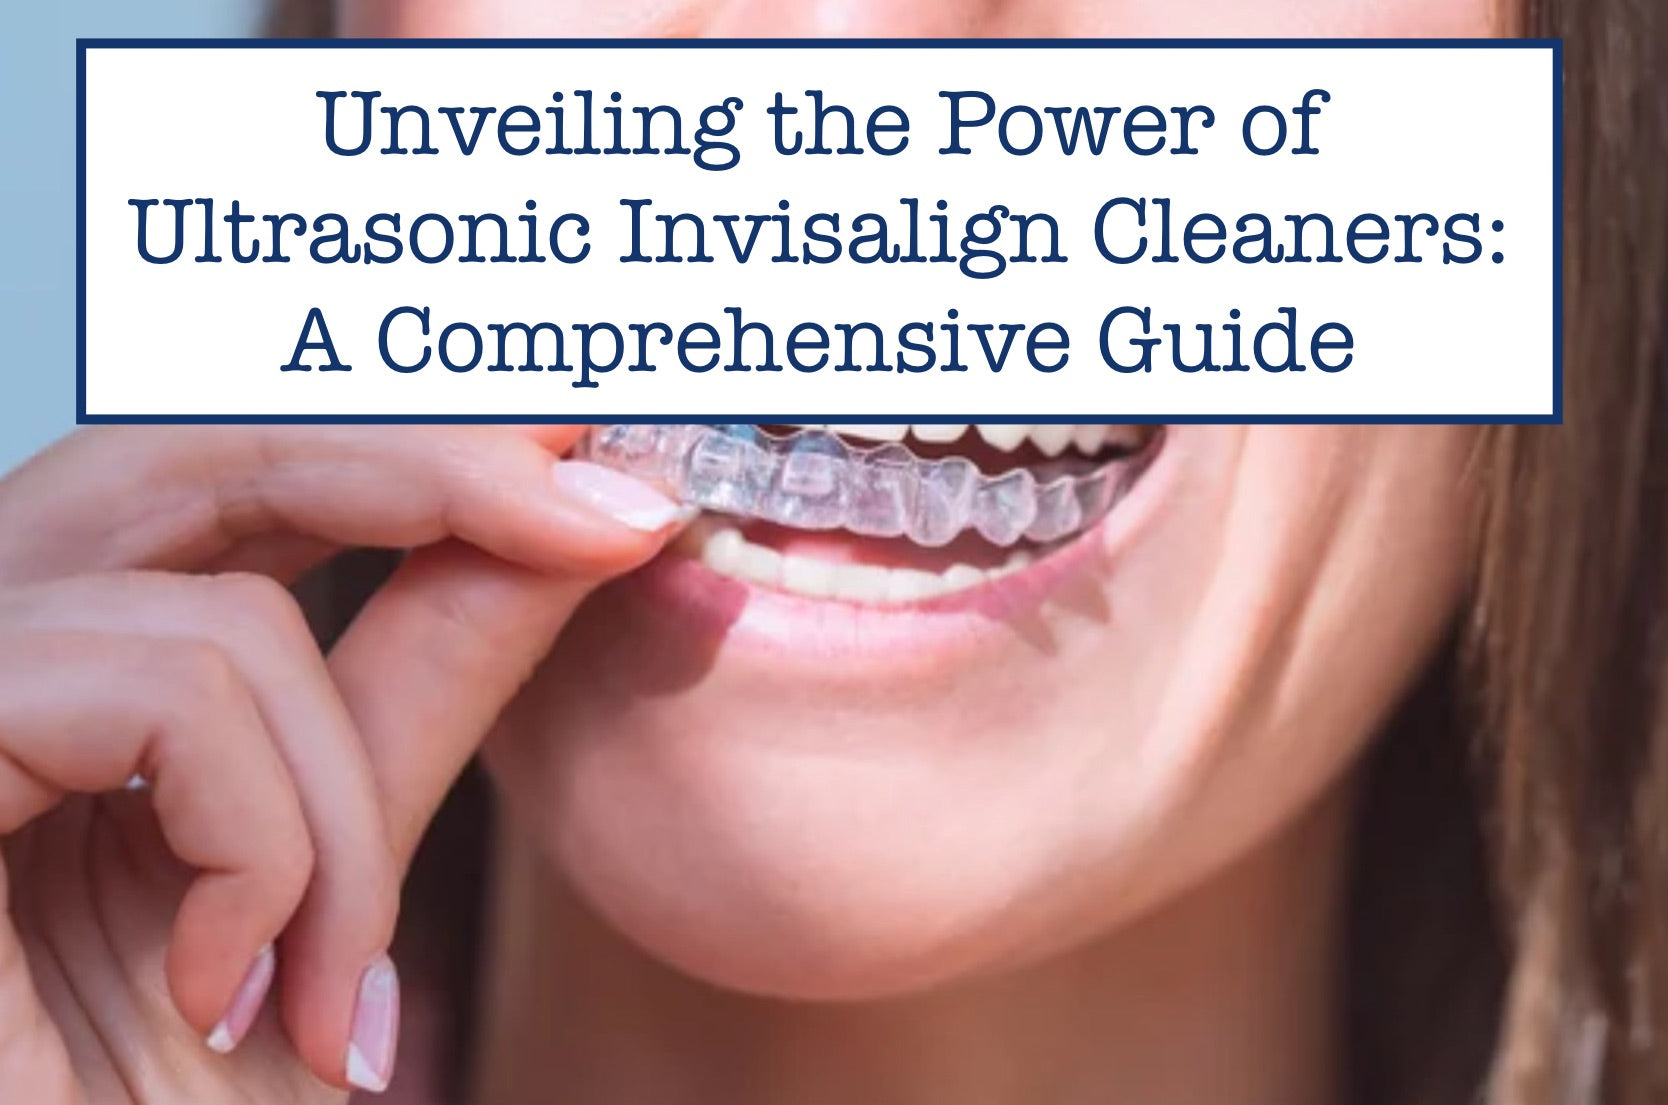 Unveiling the Power of Ultrasonic Invisalign Cleaners: A Comprehensive Guide